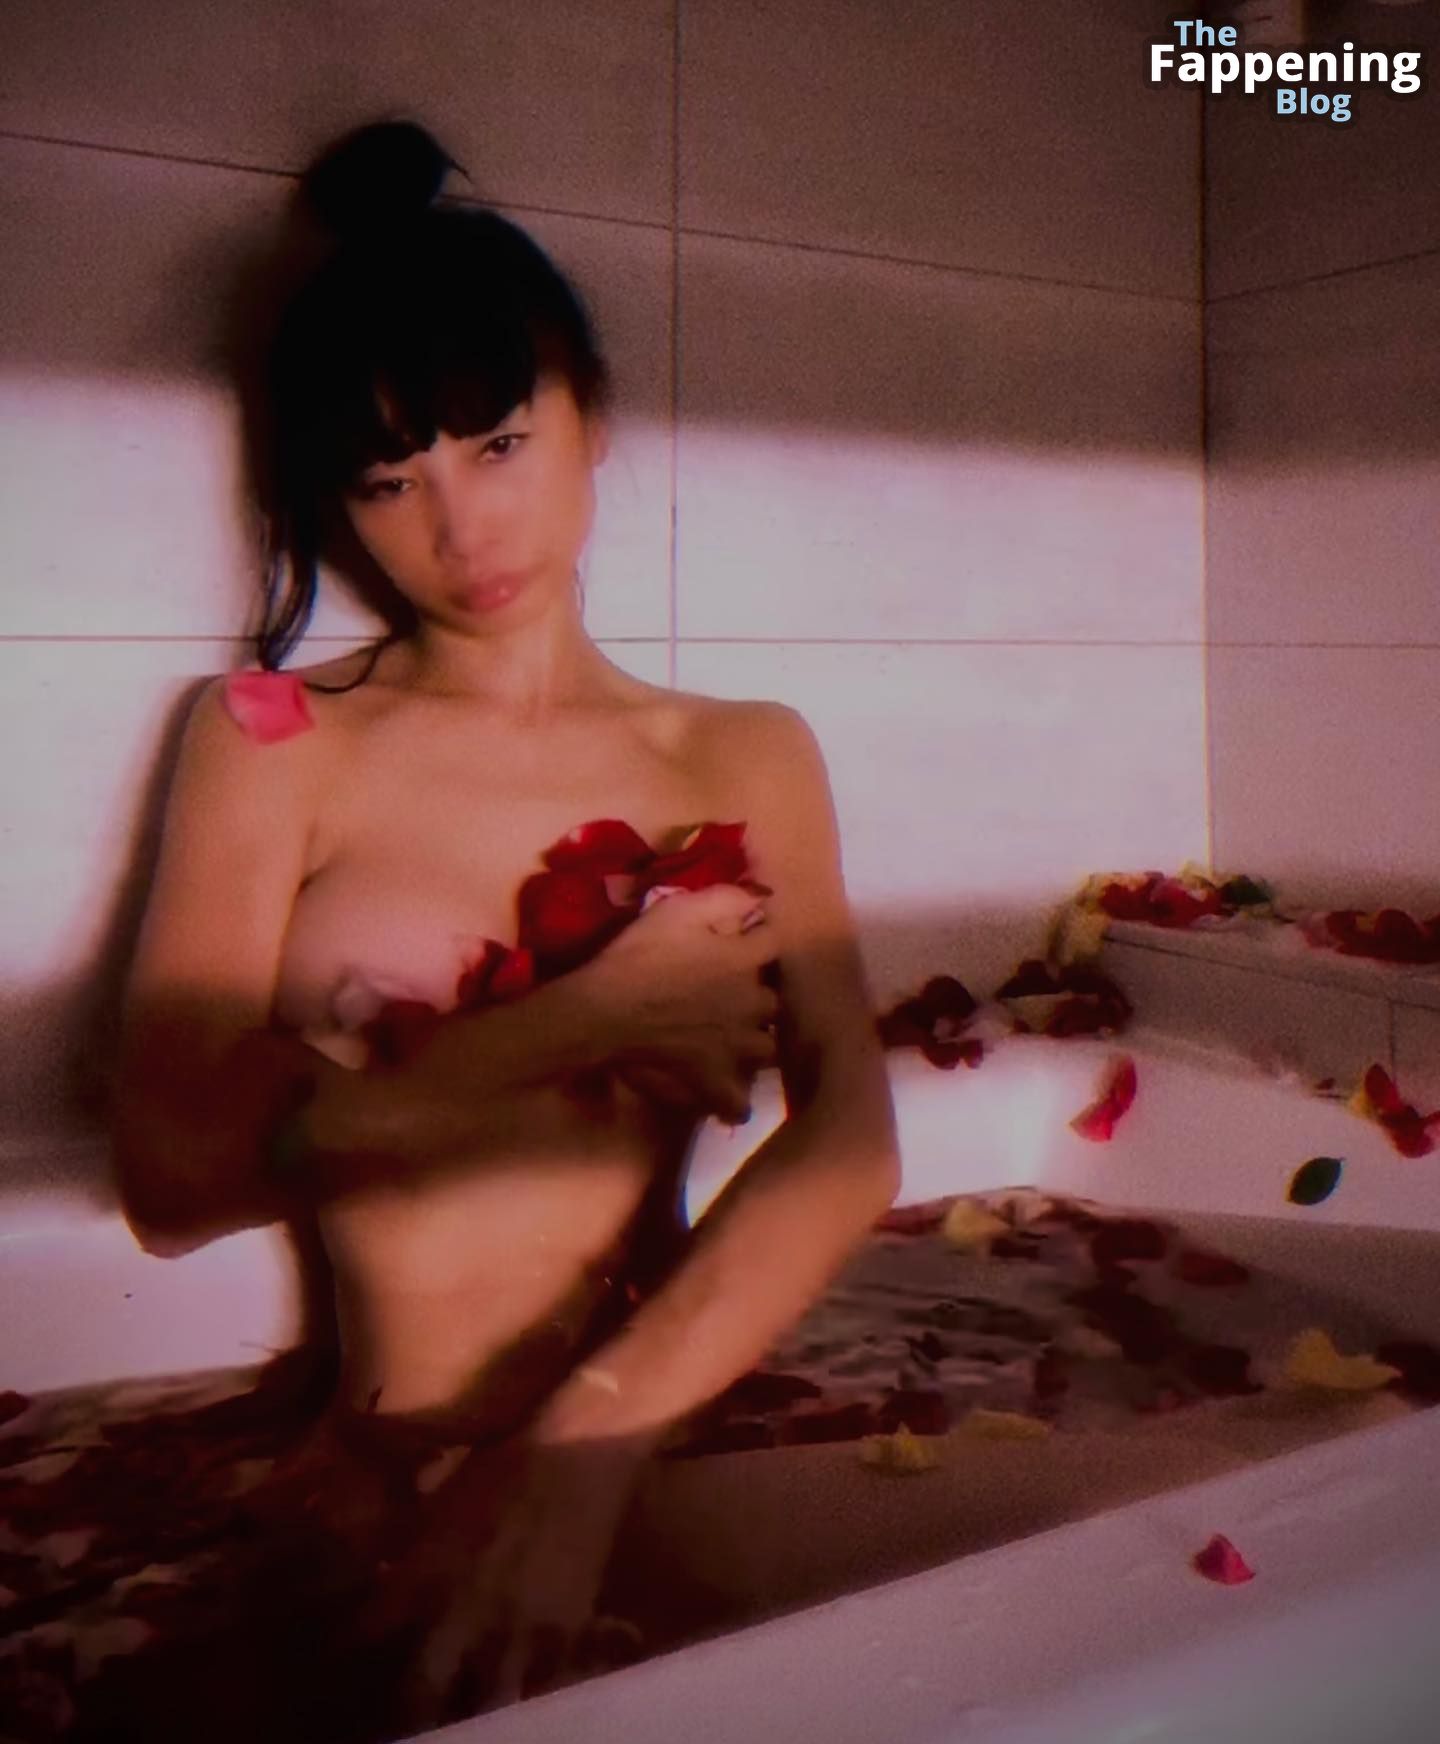 Bai-Ling-Nude-24-The-Fappening-Blog.jpg